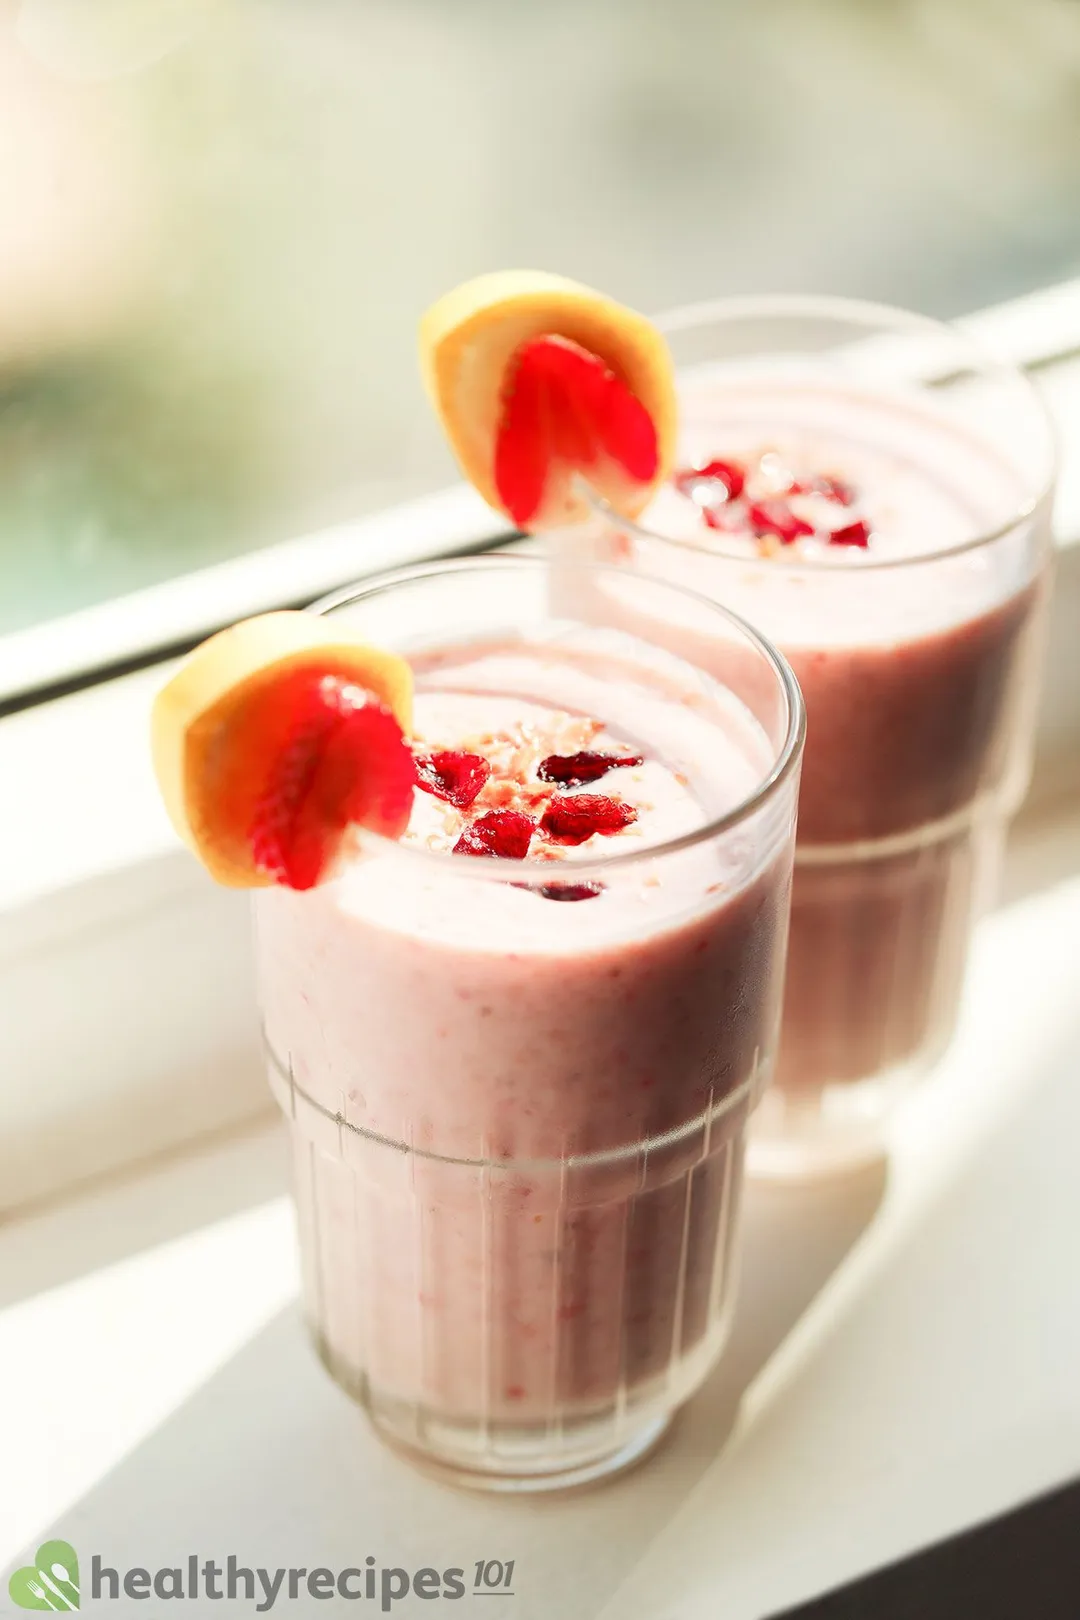 Two glasses of pink smoothie garnished with banana slices and strawberry slices laid near a window